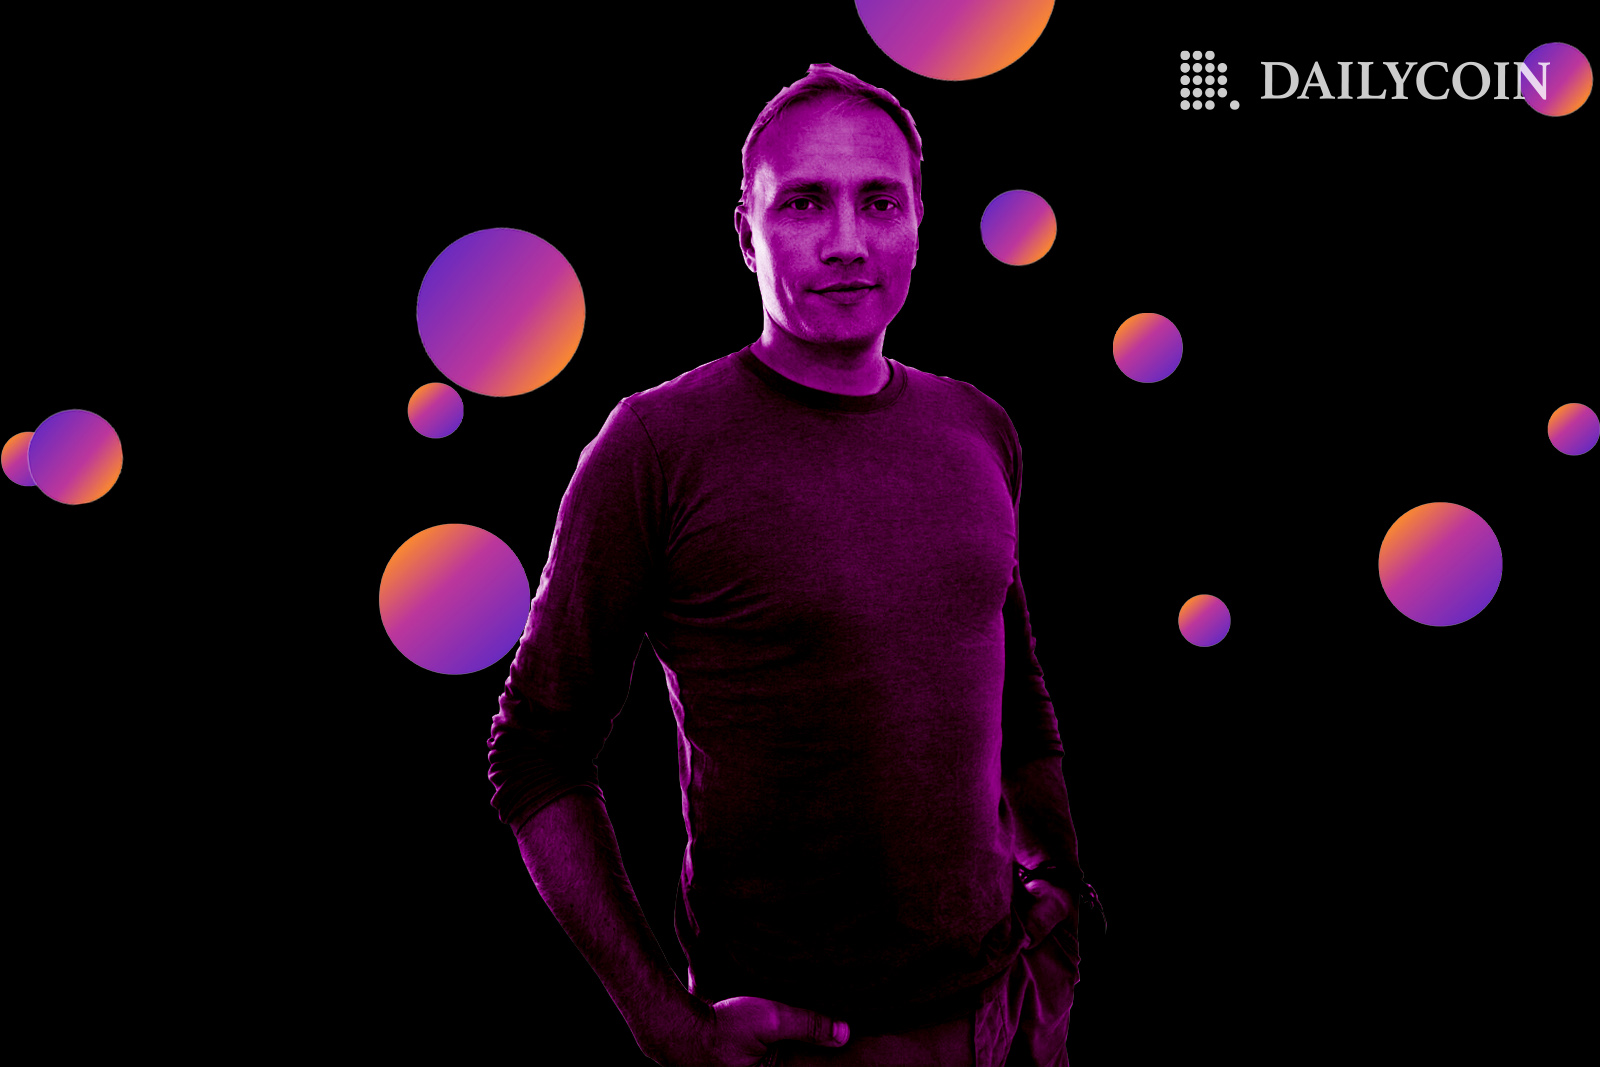 Sweatcoin founder Oleg Fomenko standing in a black background with purple bubbles.